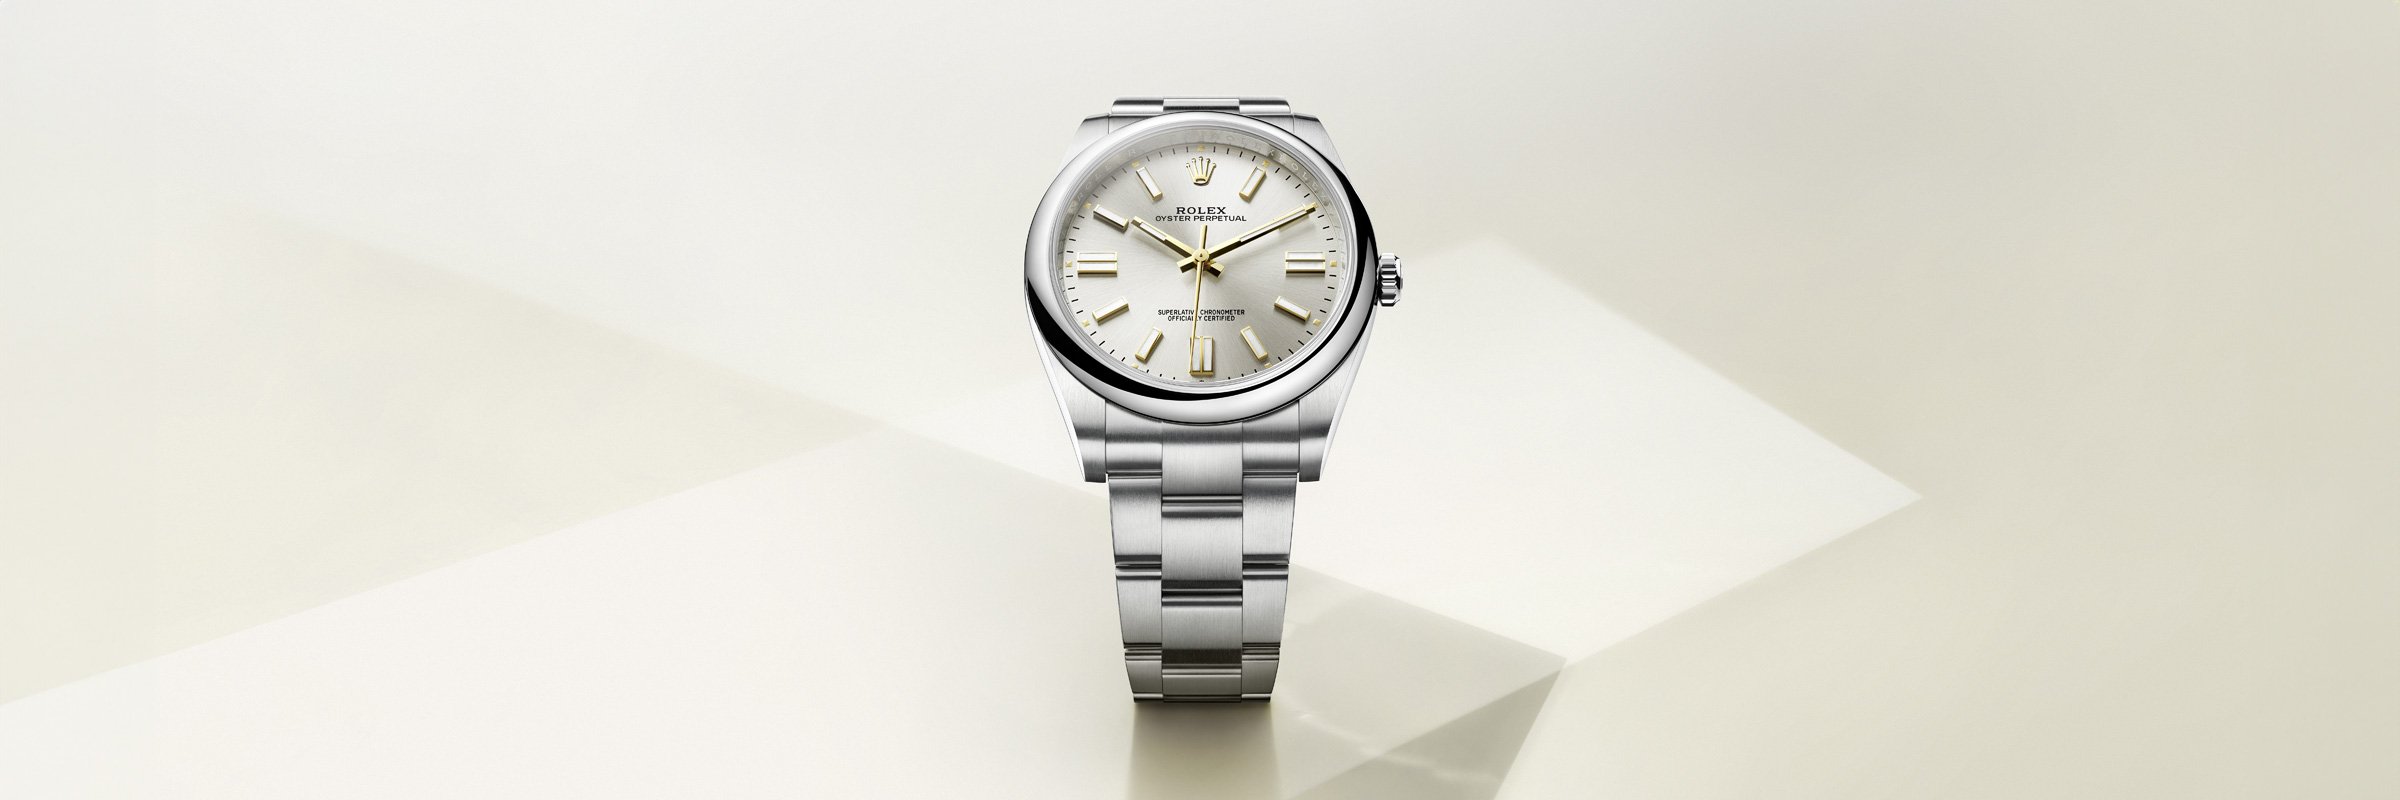 Rolex Oyster Perpetual watches